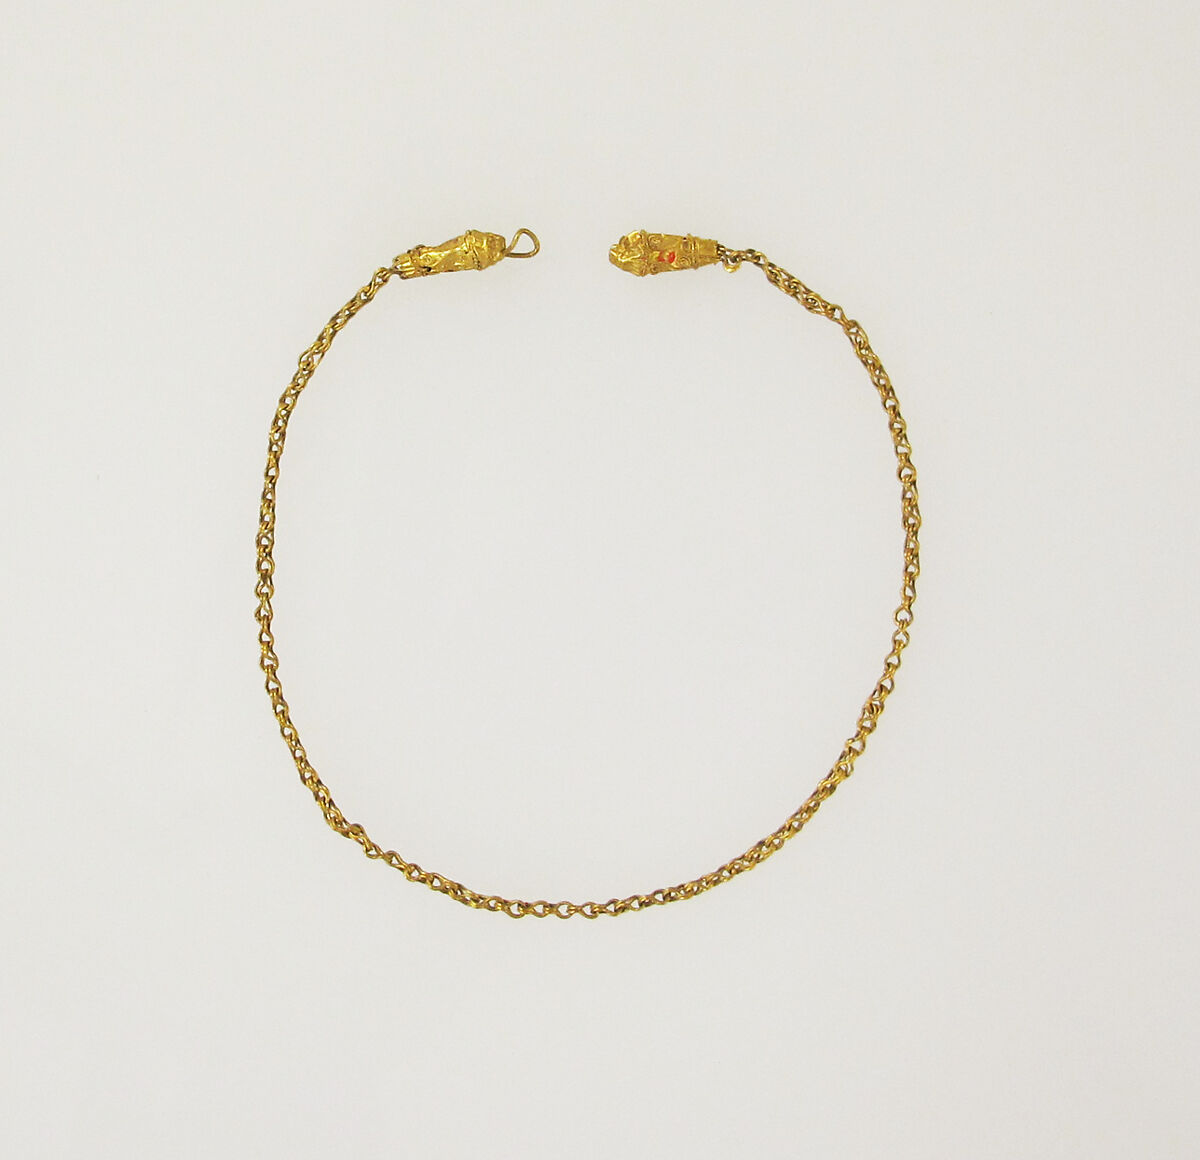 Necklace with lion head terminals, Gold, Greek 